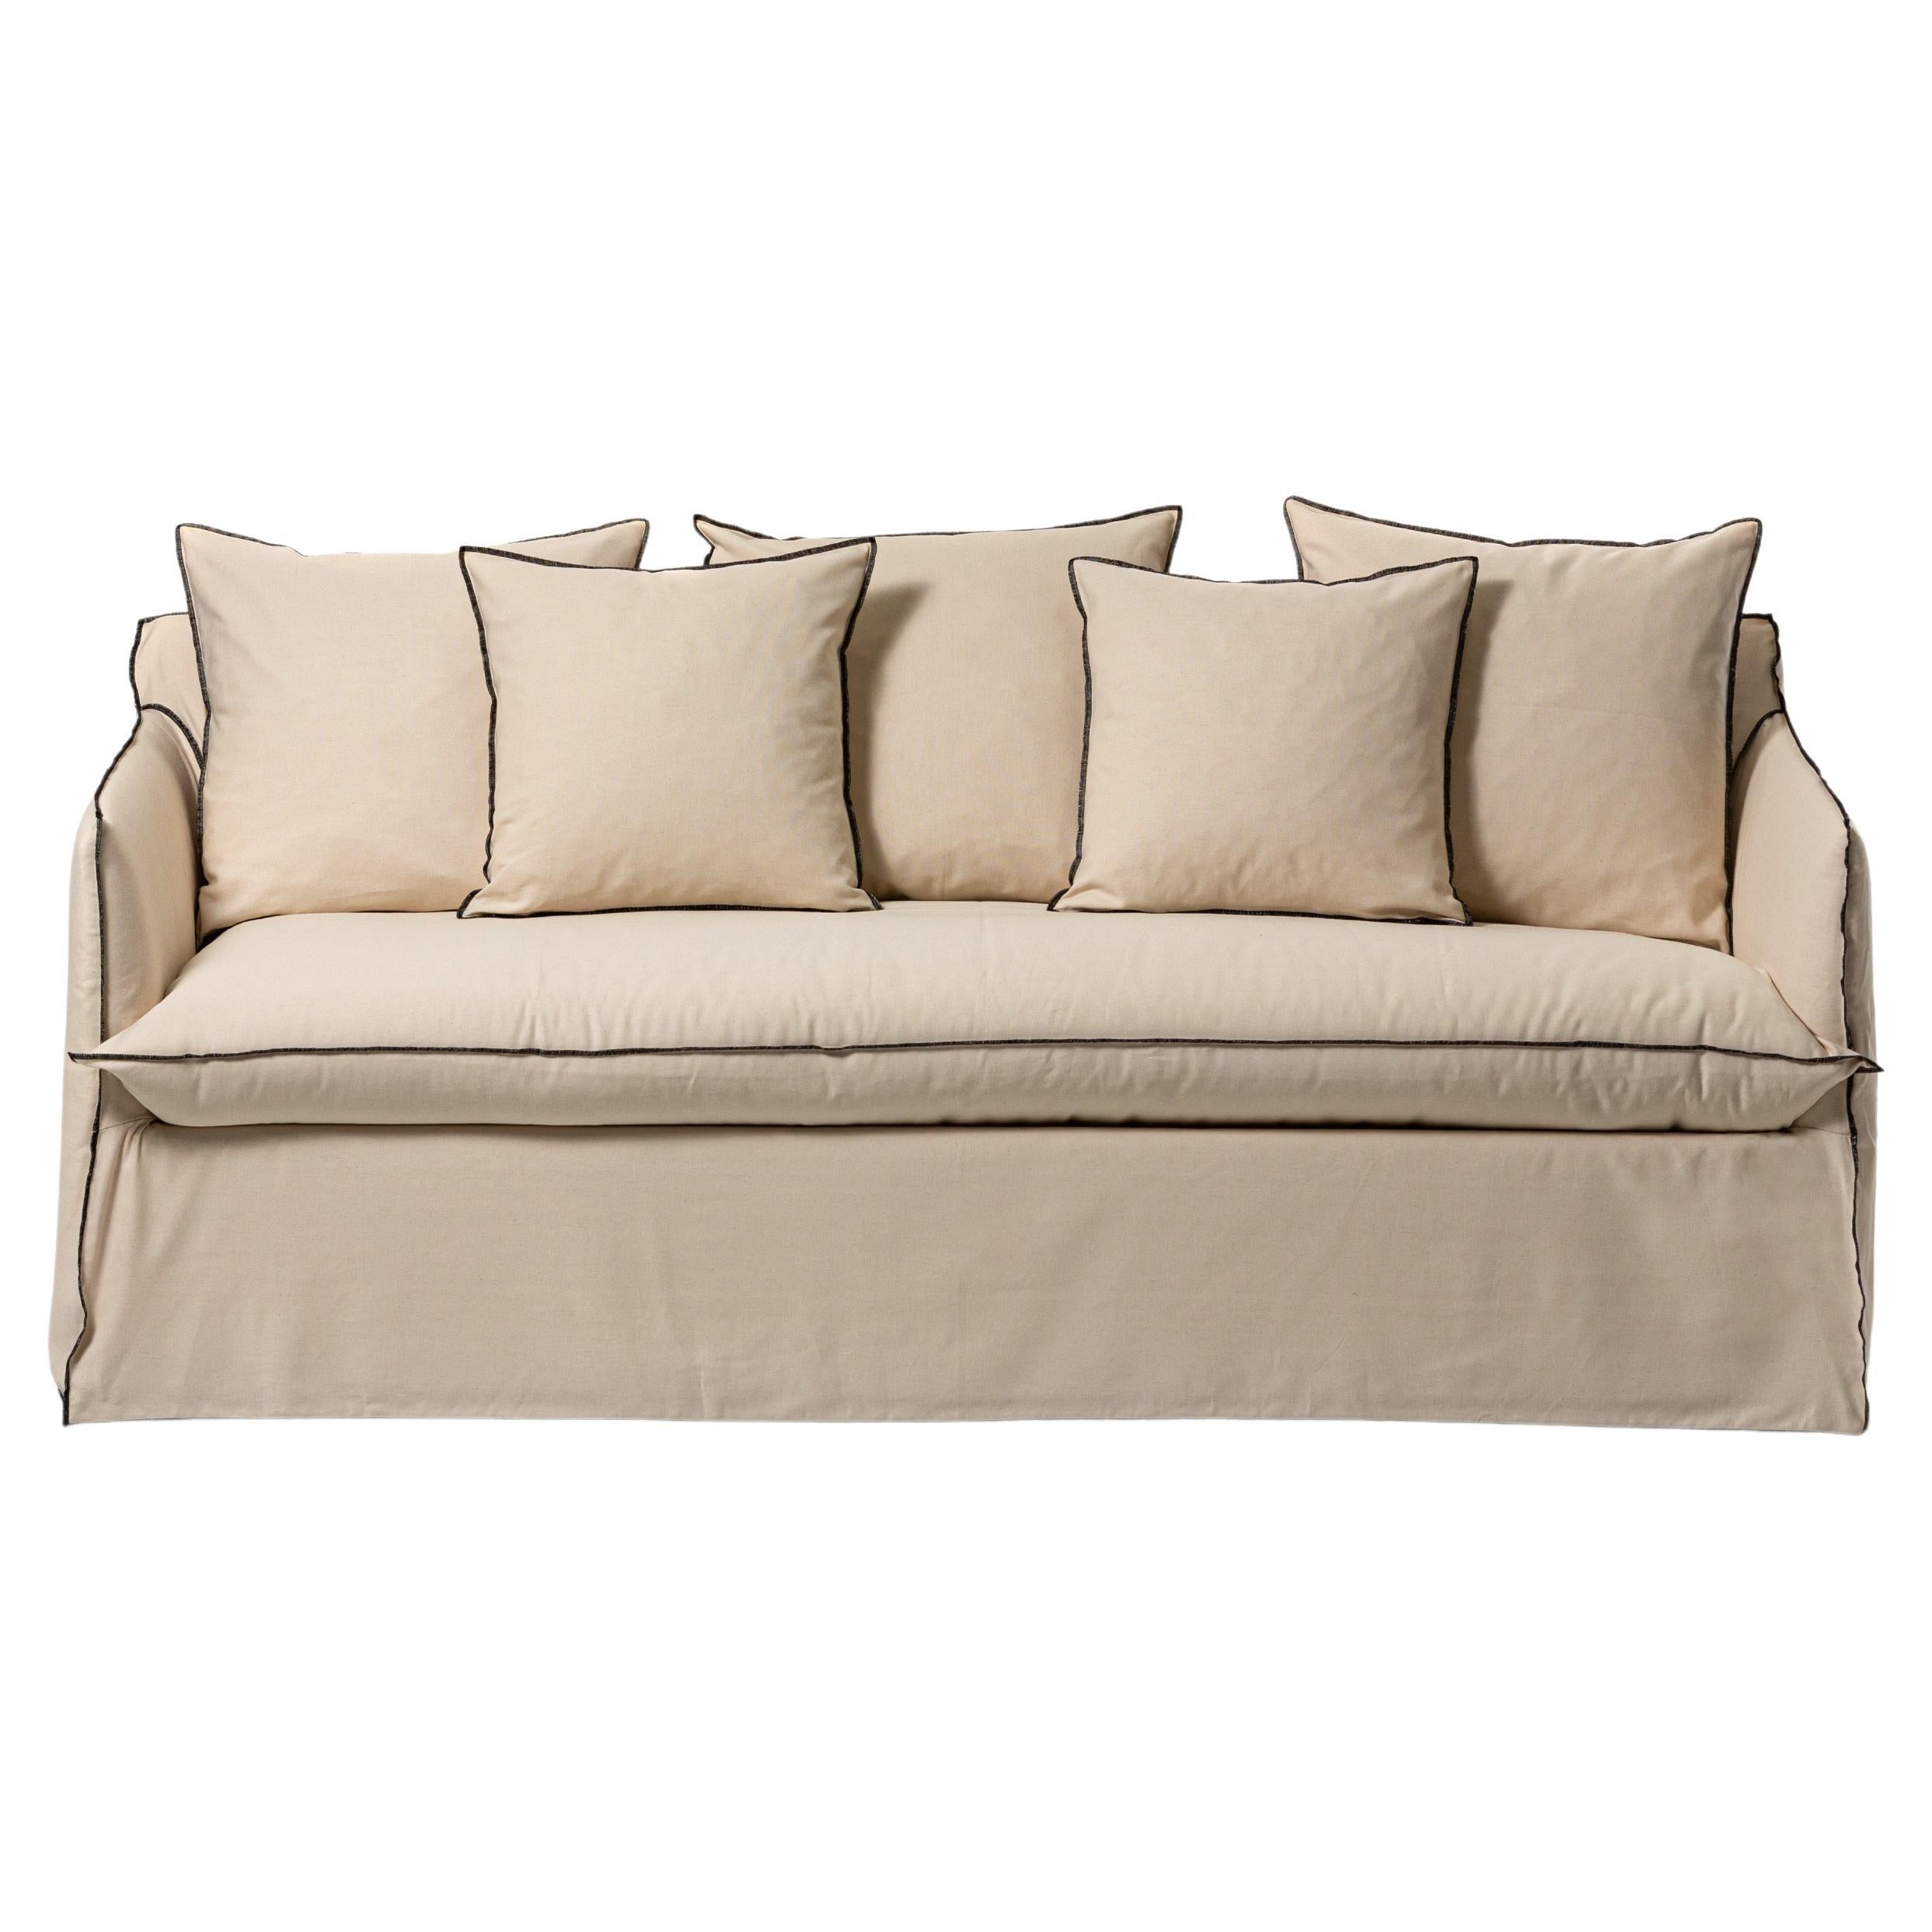 Gervasoni Ghost 15 Sofa Bed in Rene Upholstery by Paola Navone For Sale